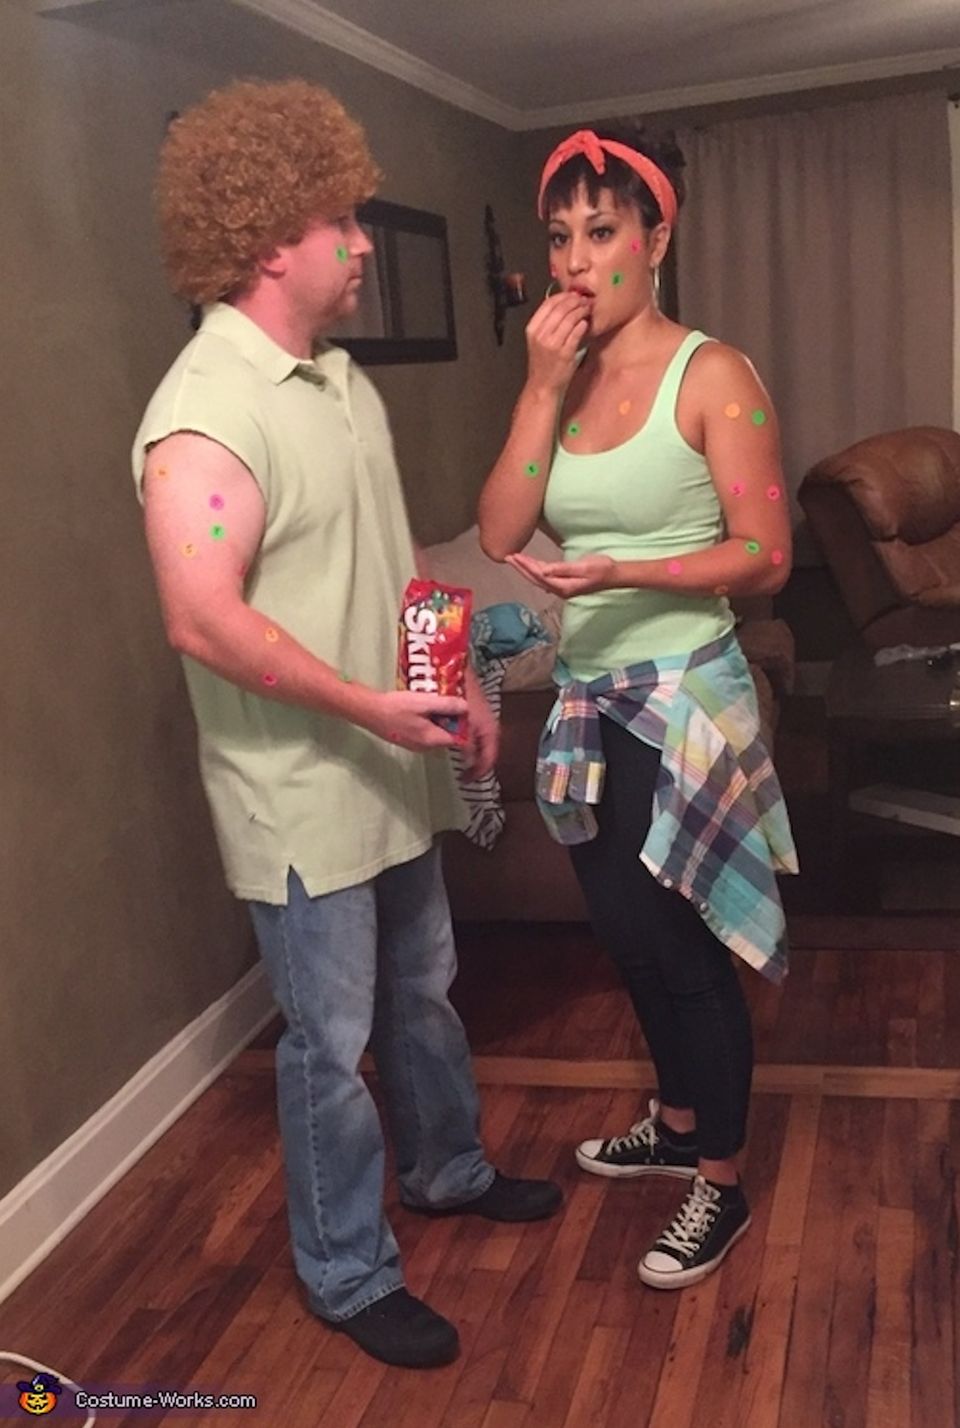 Diy Last Minute Halloween Costumes For Couples That Are Actually Doable 4948